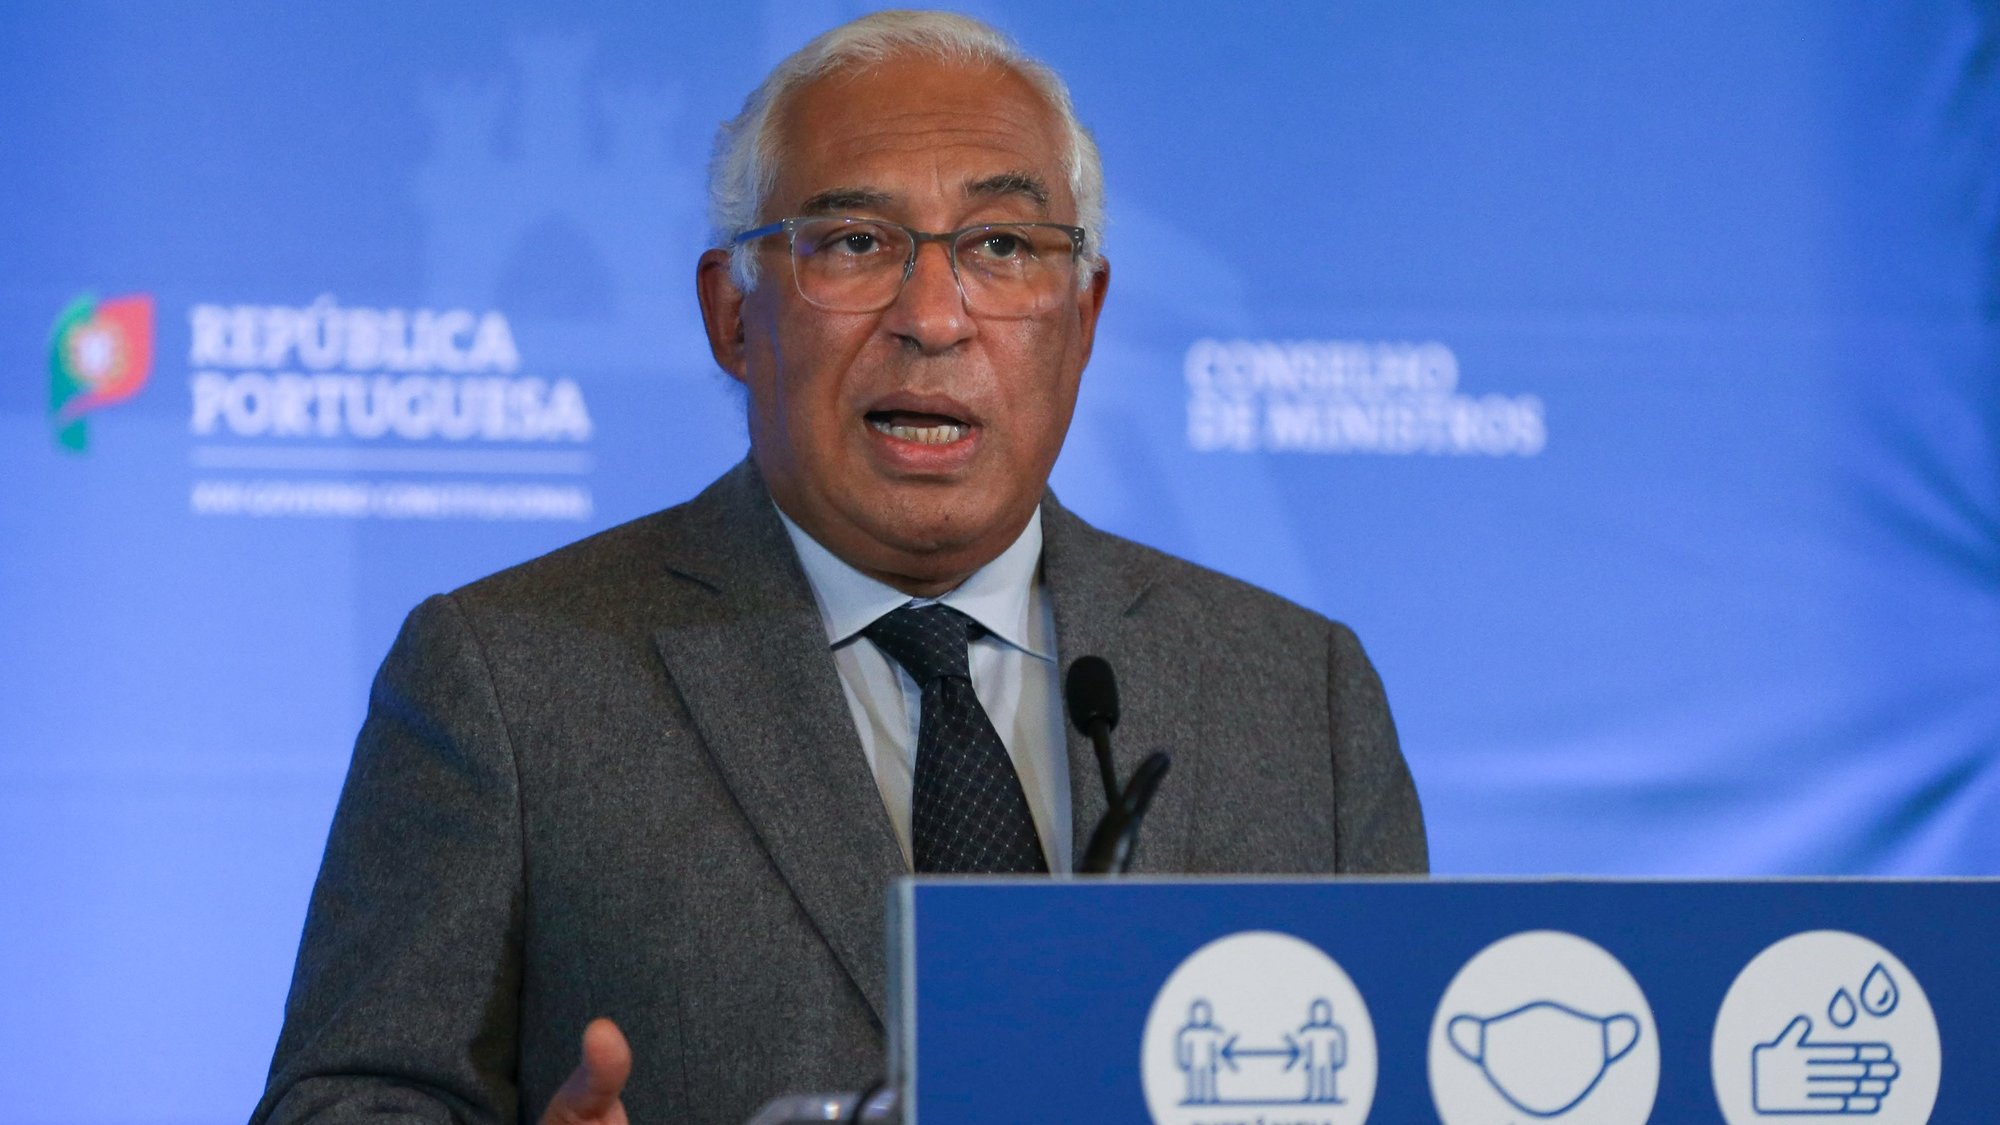 Portuguese Prime Minister Antonio Costa speaks to announce the new measures during the briefing of the Council of Ministers Meeting, at Palacio da Ajuda, in Lisbon, Portugal, 25 November 2021. In Portugal, since March 2020, 18,385 people have died and 1,133,241 cases of infection have been counted, according to data from the Directorate-General of Health. MANUEL DE ALMEIDA/LUSA